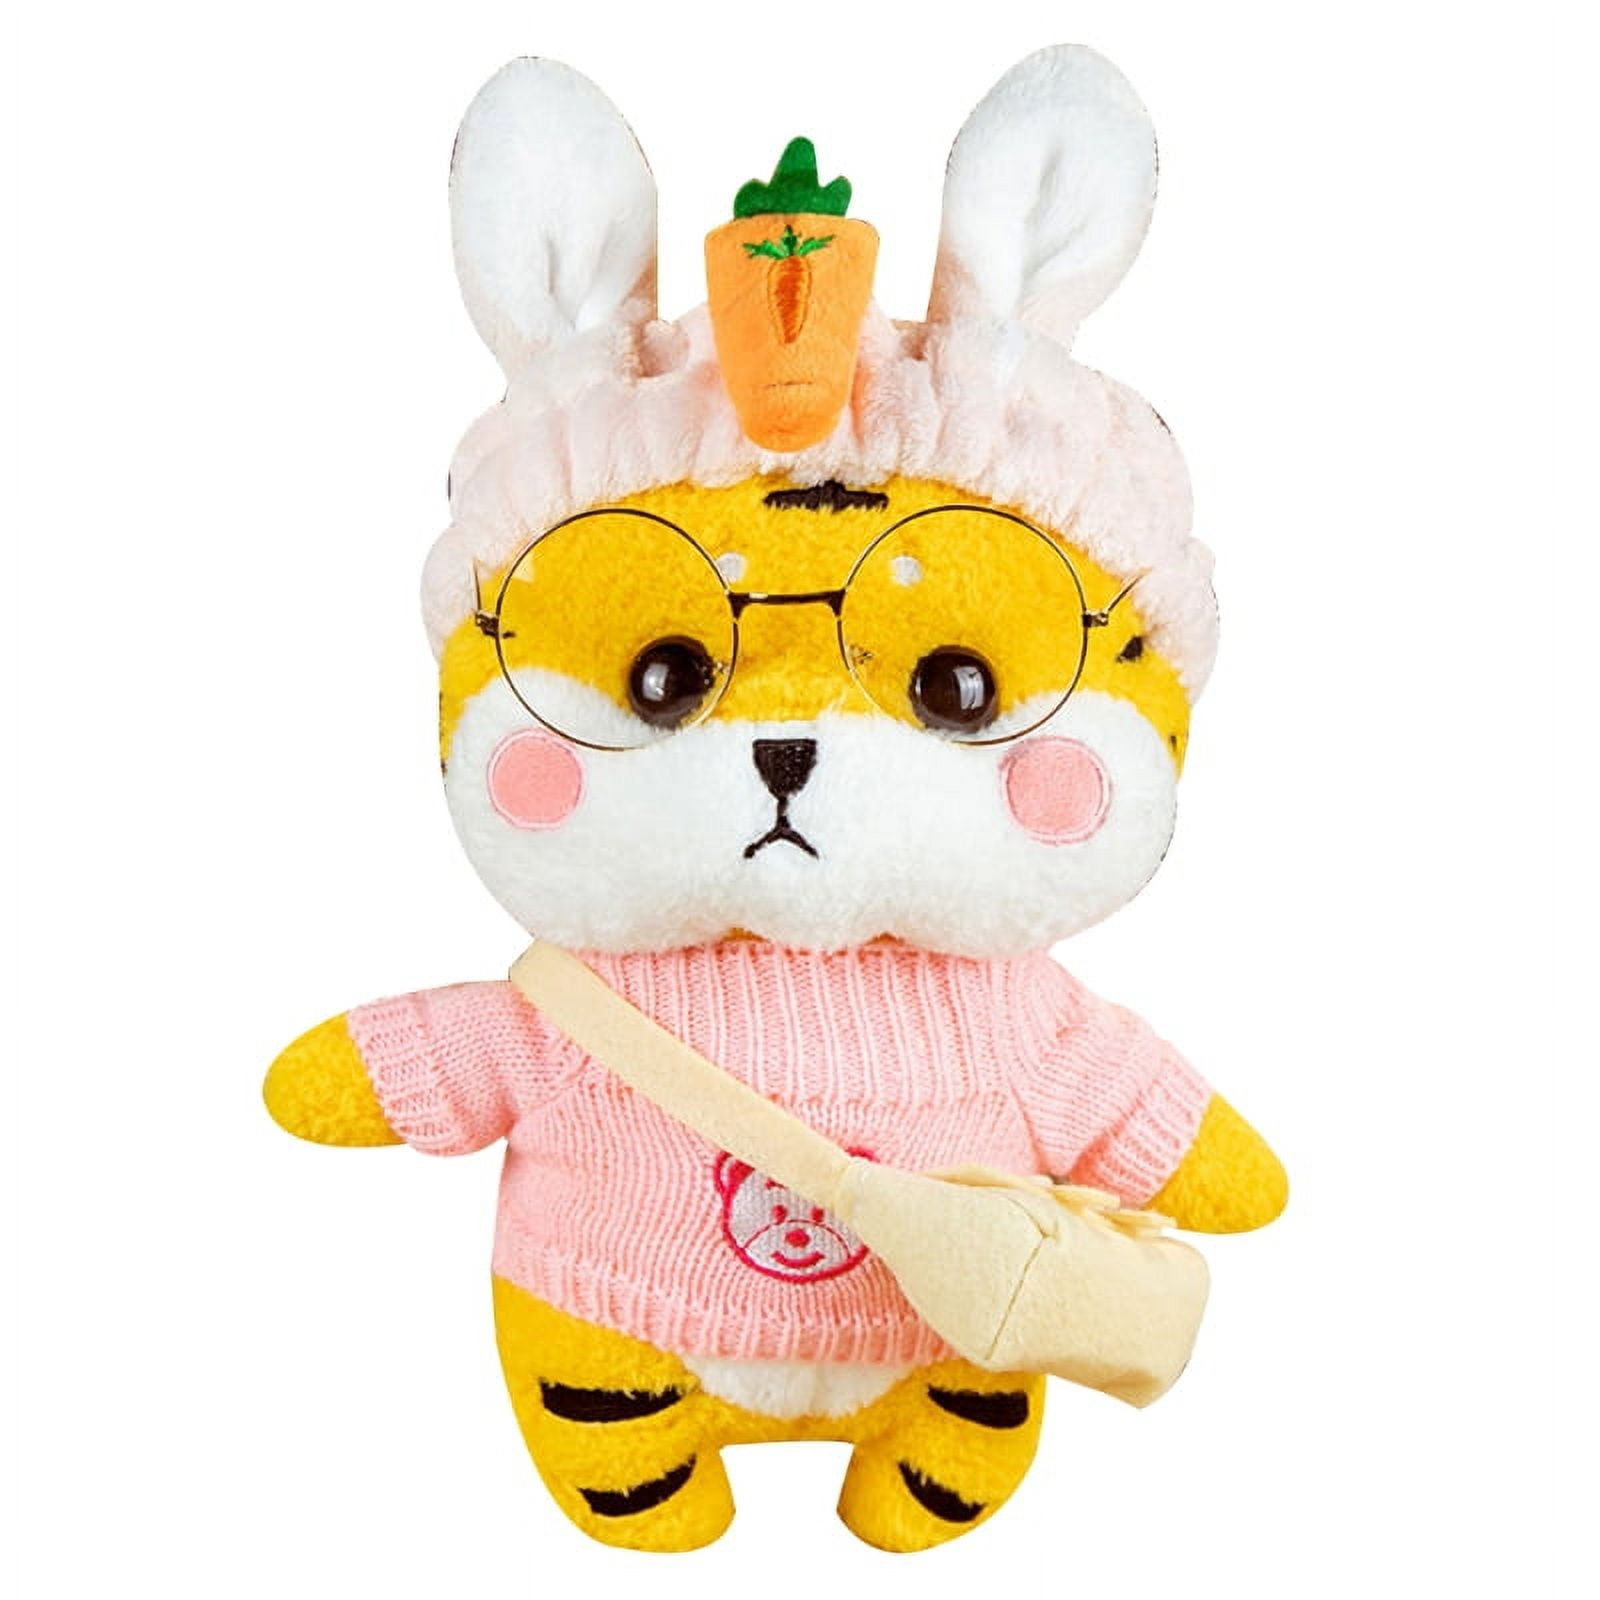 GENEMA 30cm/12in Plush Doll Lovely Stuffed Animal Tiger DIY Dress Up Toy  Soft Comfort Sleeping Doll Home Decor Xmas Party Gift 